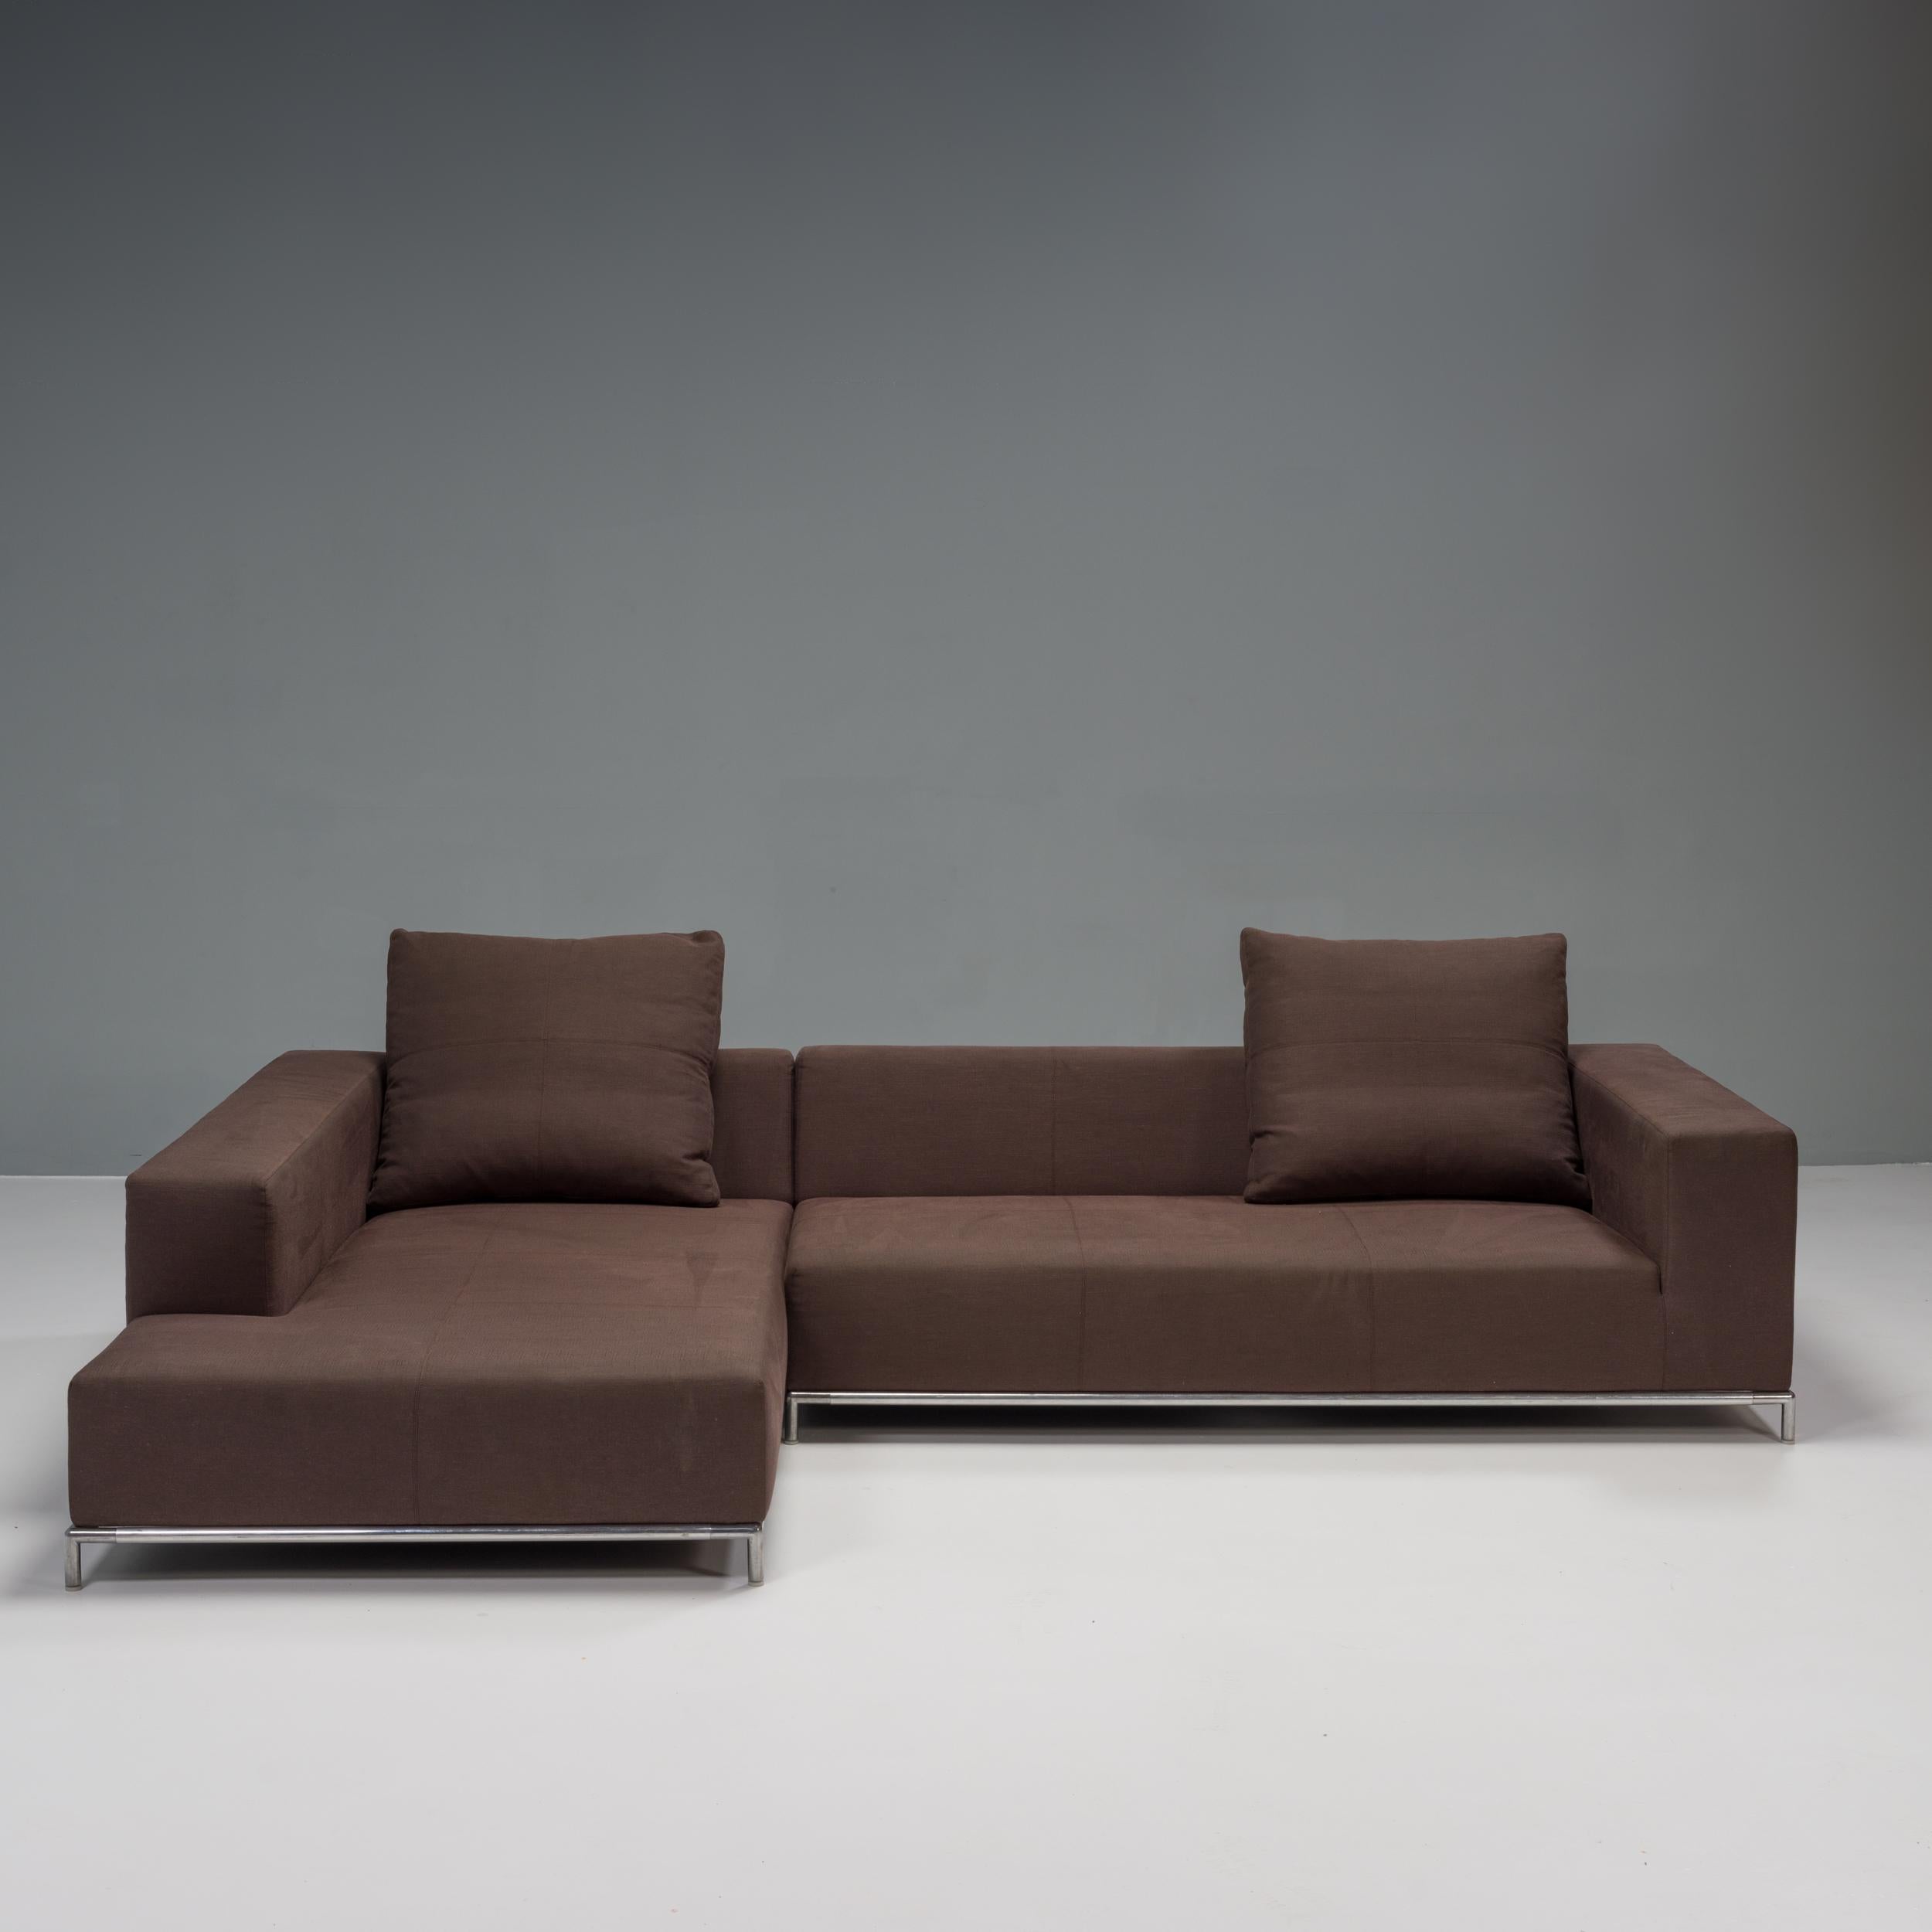 The George collection was originally designed in 2001 by Antonio Citterio for B&B Italia, and is a fantastic example of modern design.

This corner model comprises two units to form a tuxedo-style sofa with integrated back and armrests.

The